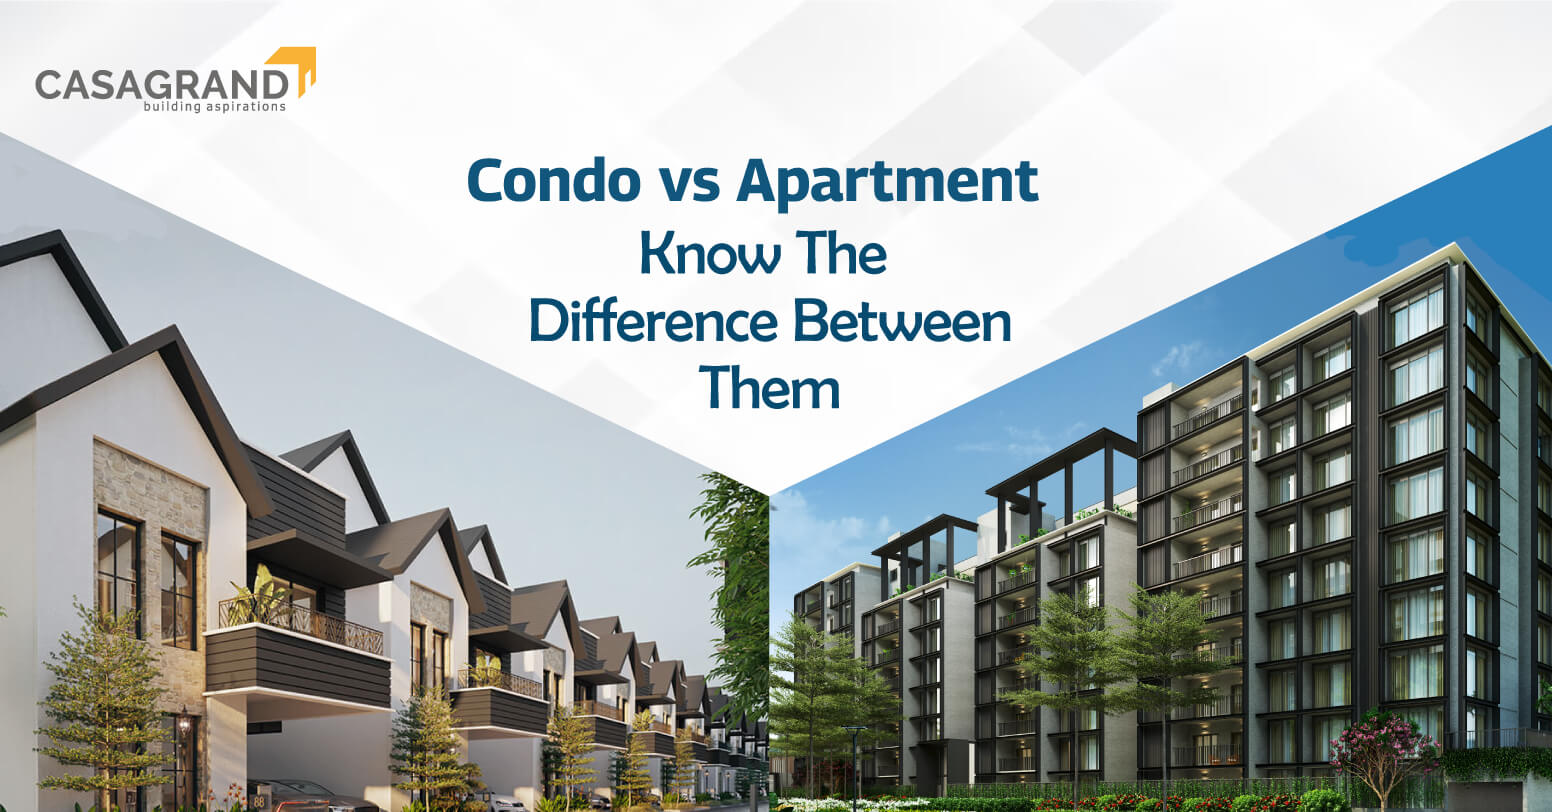 Condo vs Apartment: Know The Difference Between Them